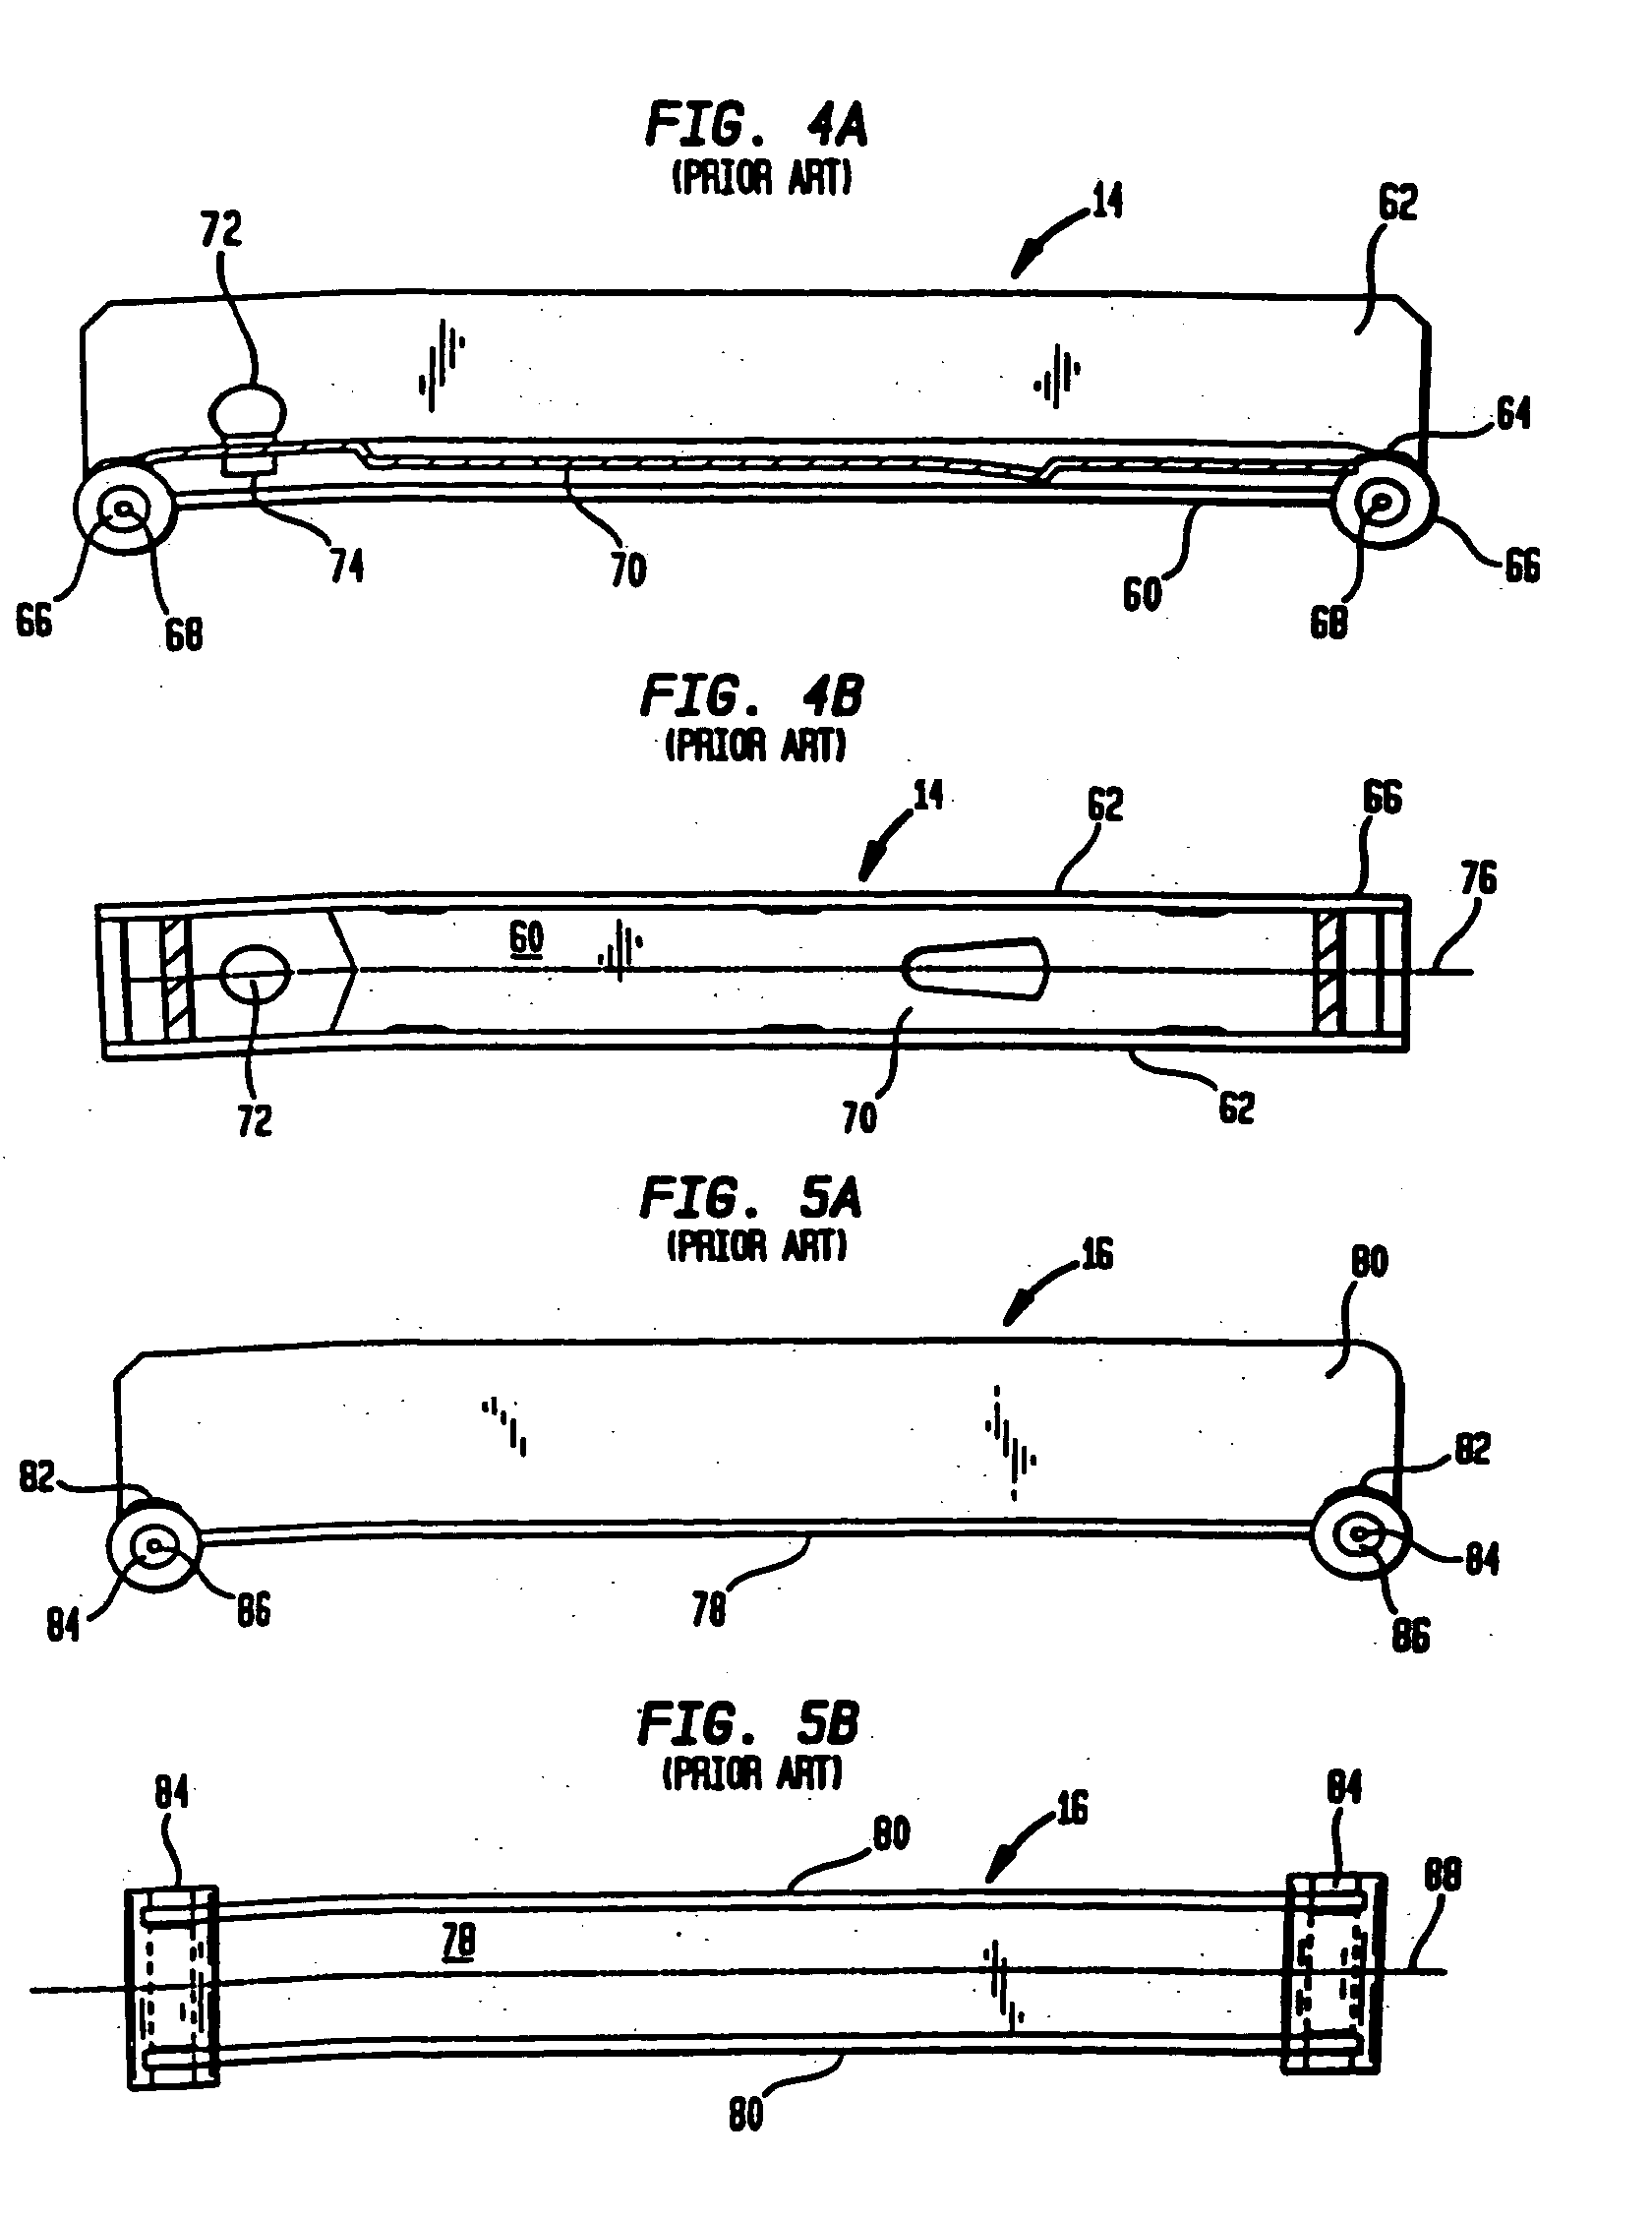 Arm apparatus for mounting electronic devices